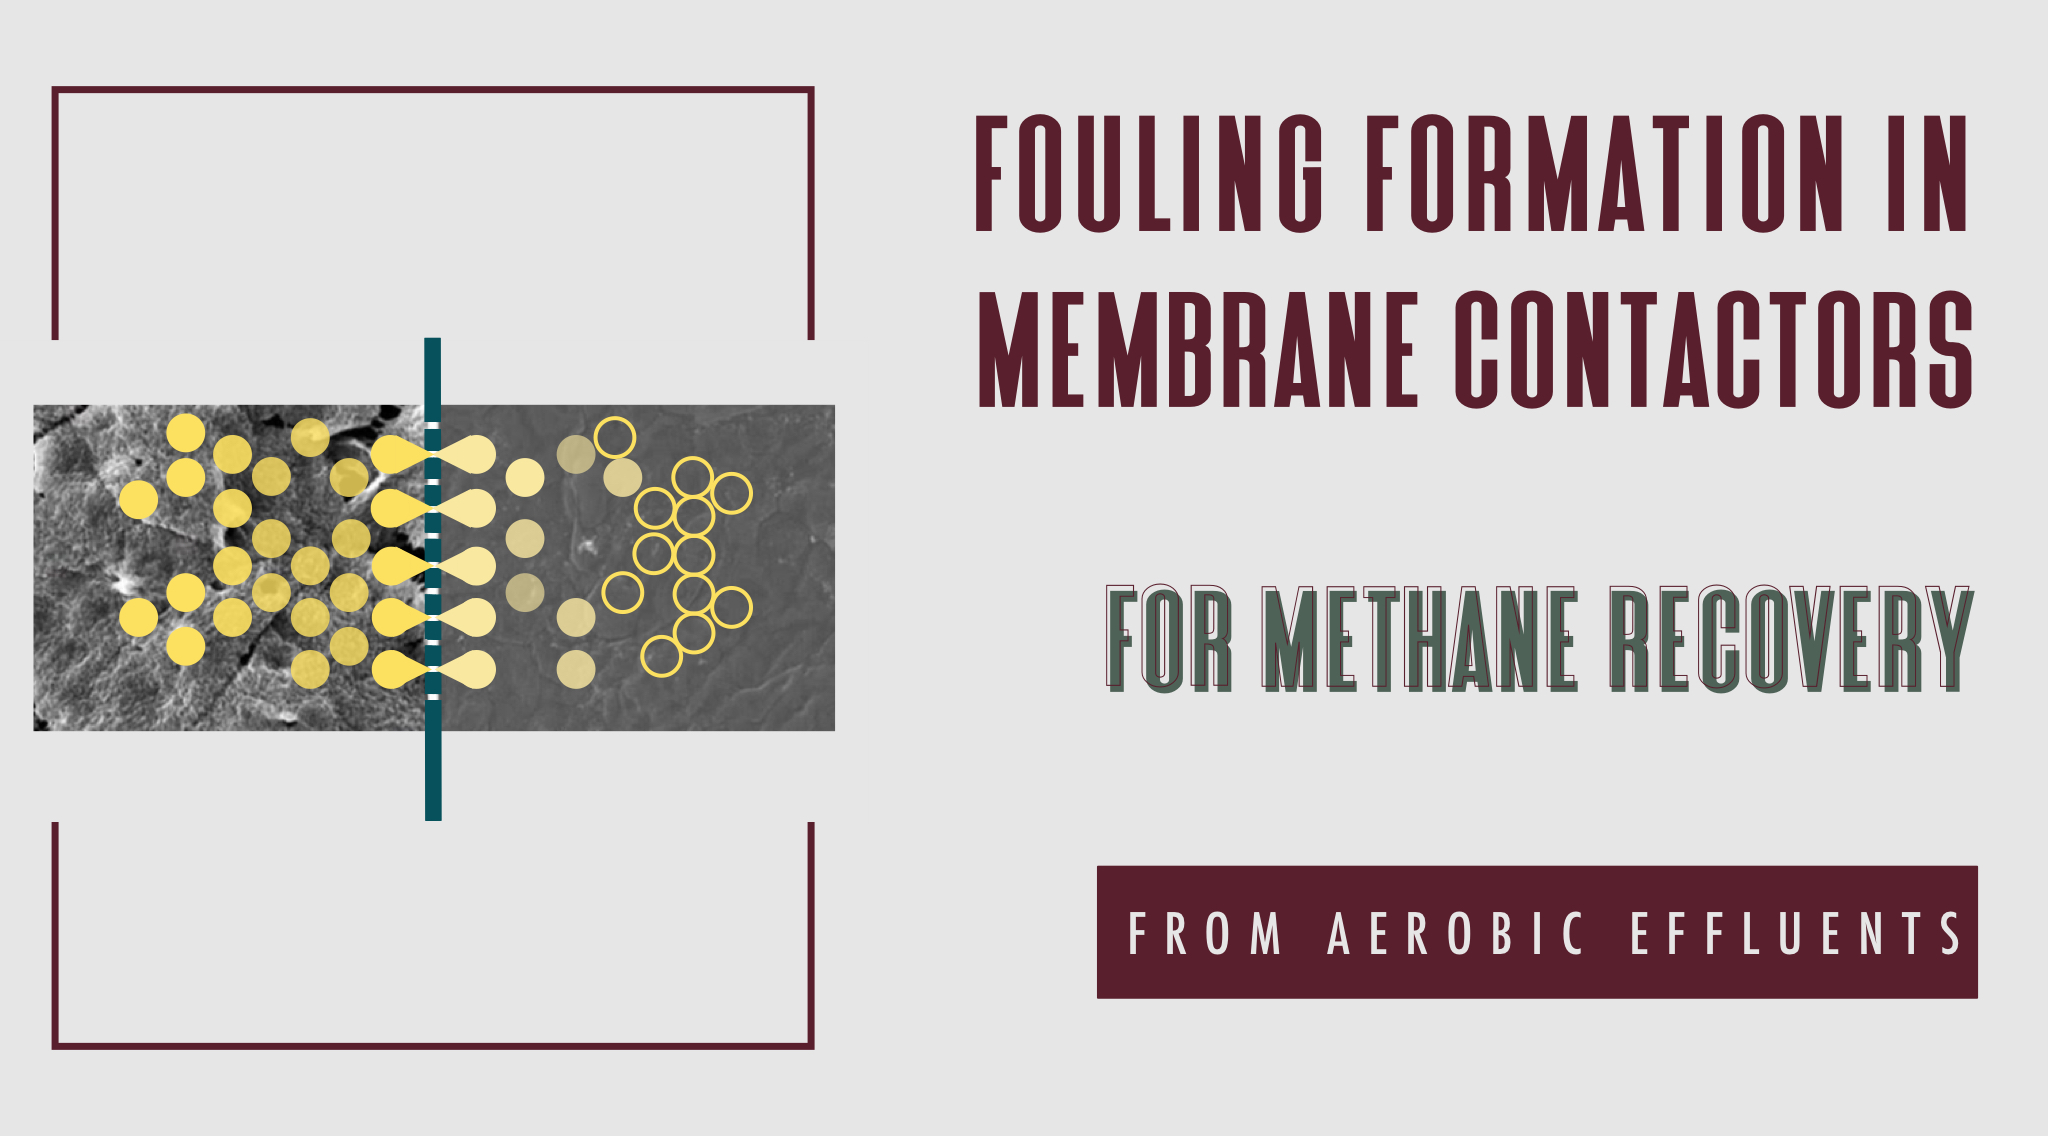 Fouling formation in membrane contactors for methane recovery from anaerobic effluents